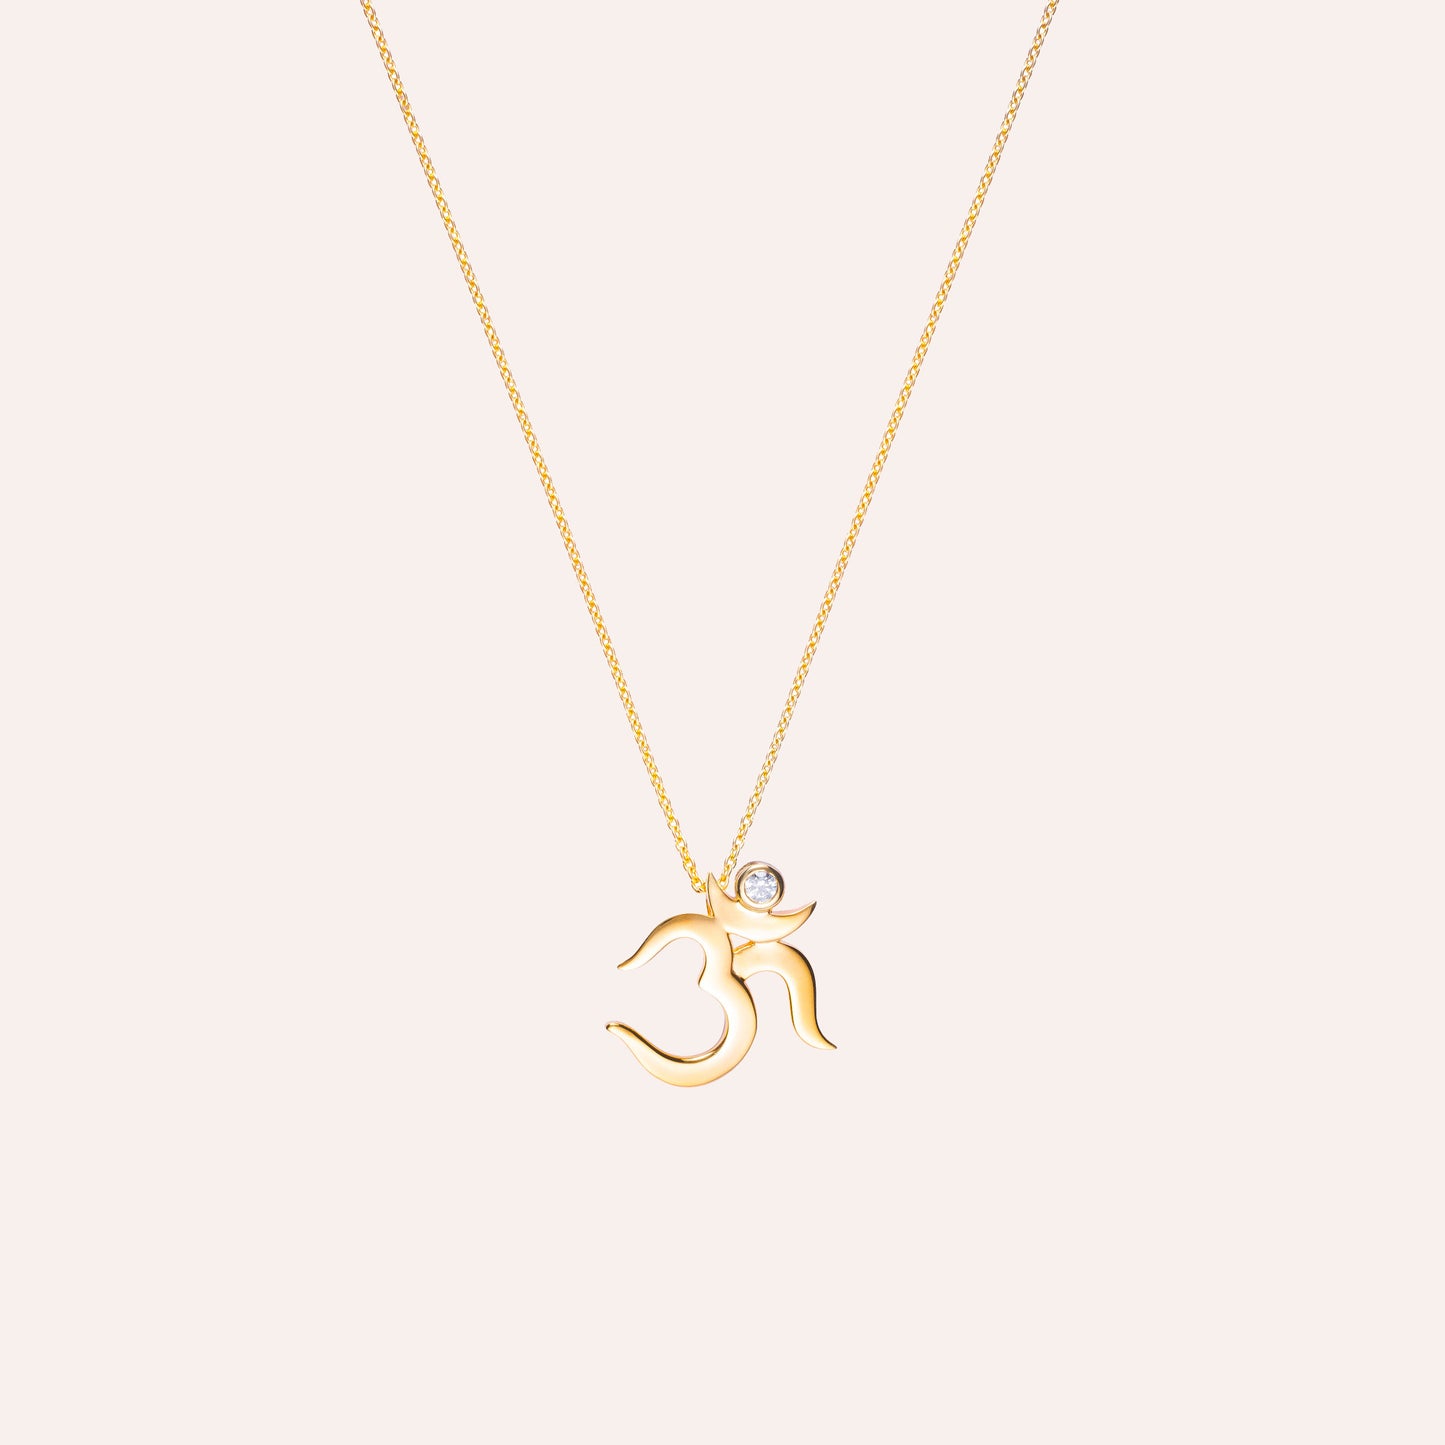 Dainty Silver Om Necklace with Cubic Zirconia